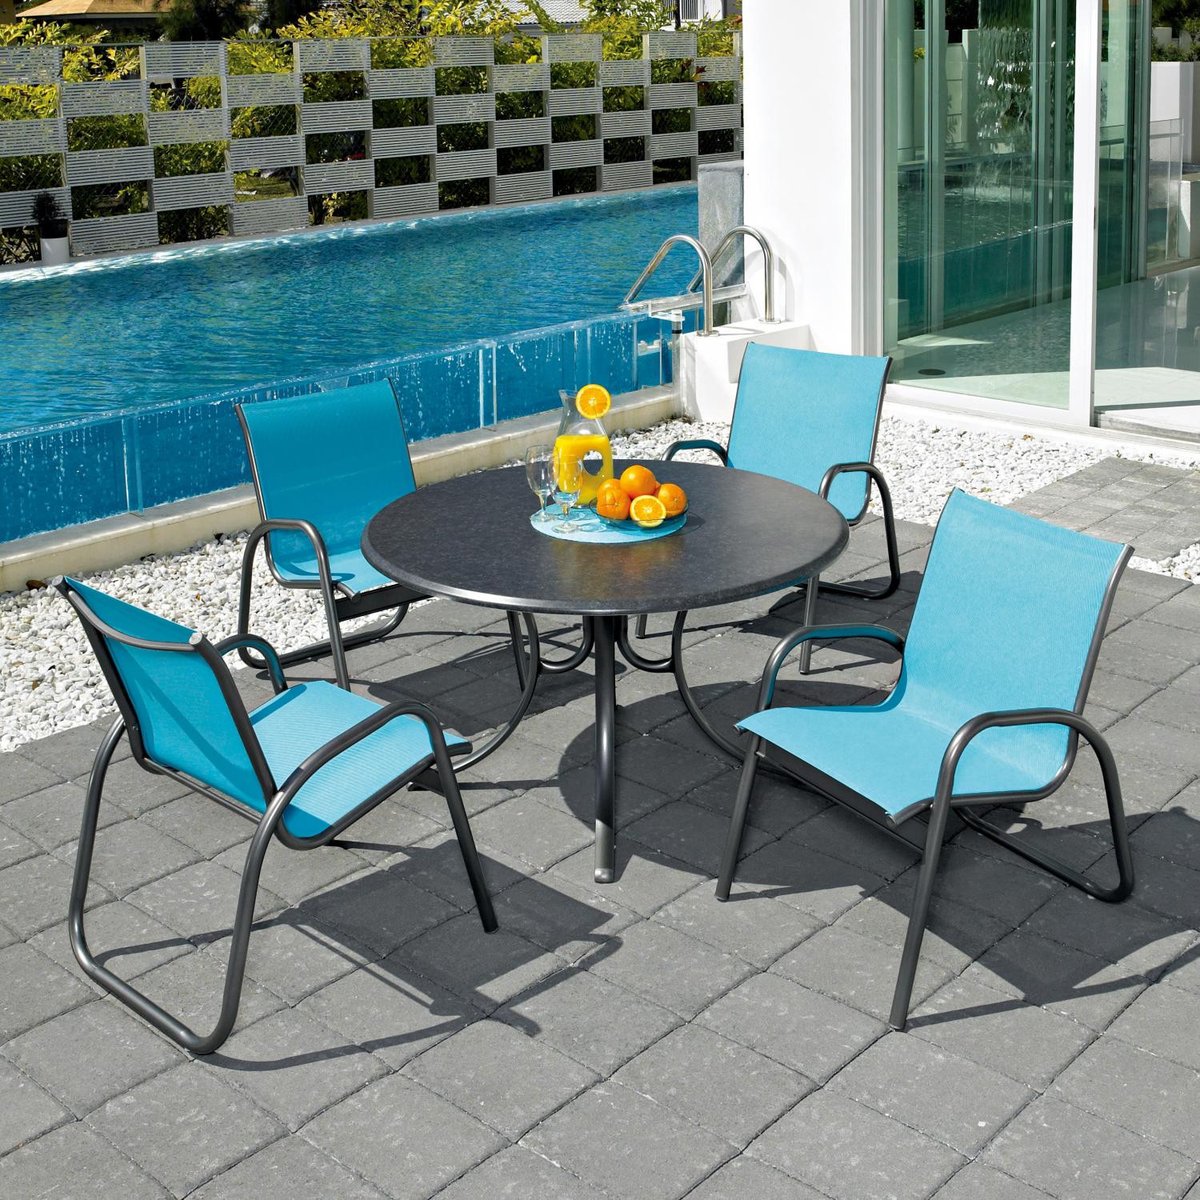 Telescope Casual has been producing quality, outdoor #patiofurniture in the USA since 1903. Their product line includes wicker, aluminum, cast aluminum and resin furniture. #outdoorliving #outdoorfurniture #sequoiaoutback
Blog: decksupplies.com/blog/outdoor-f…